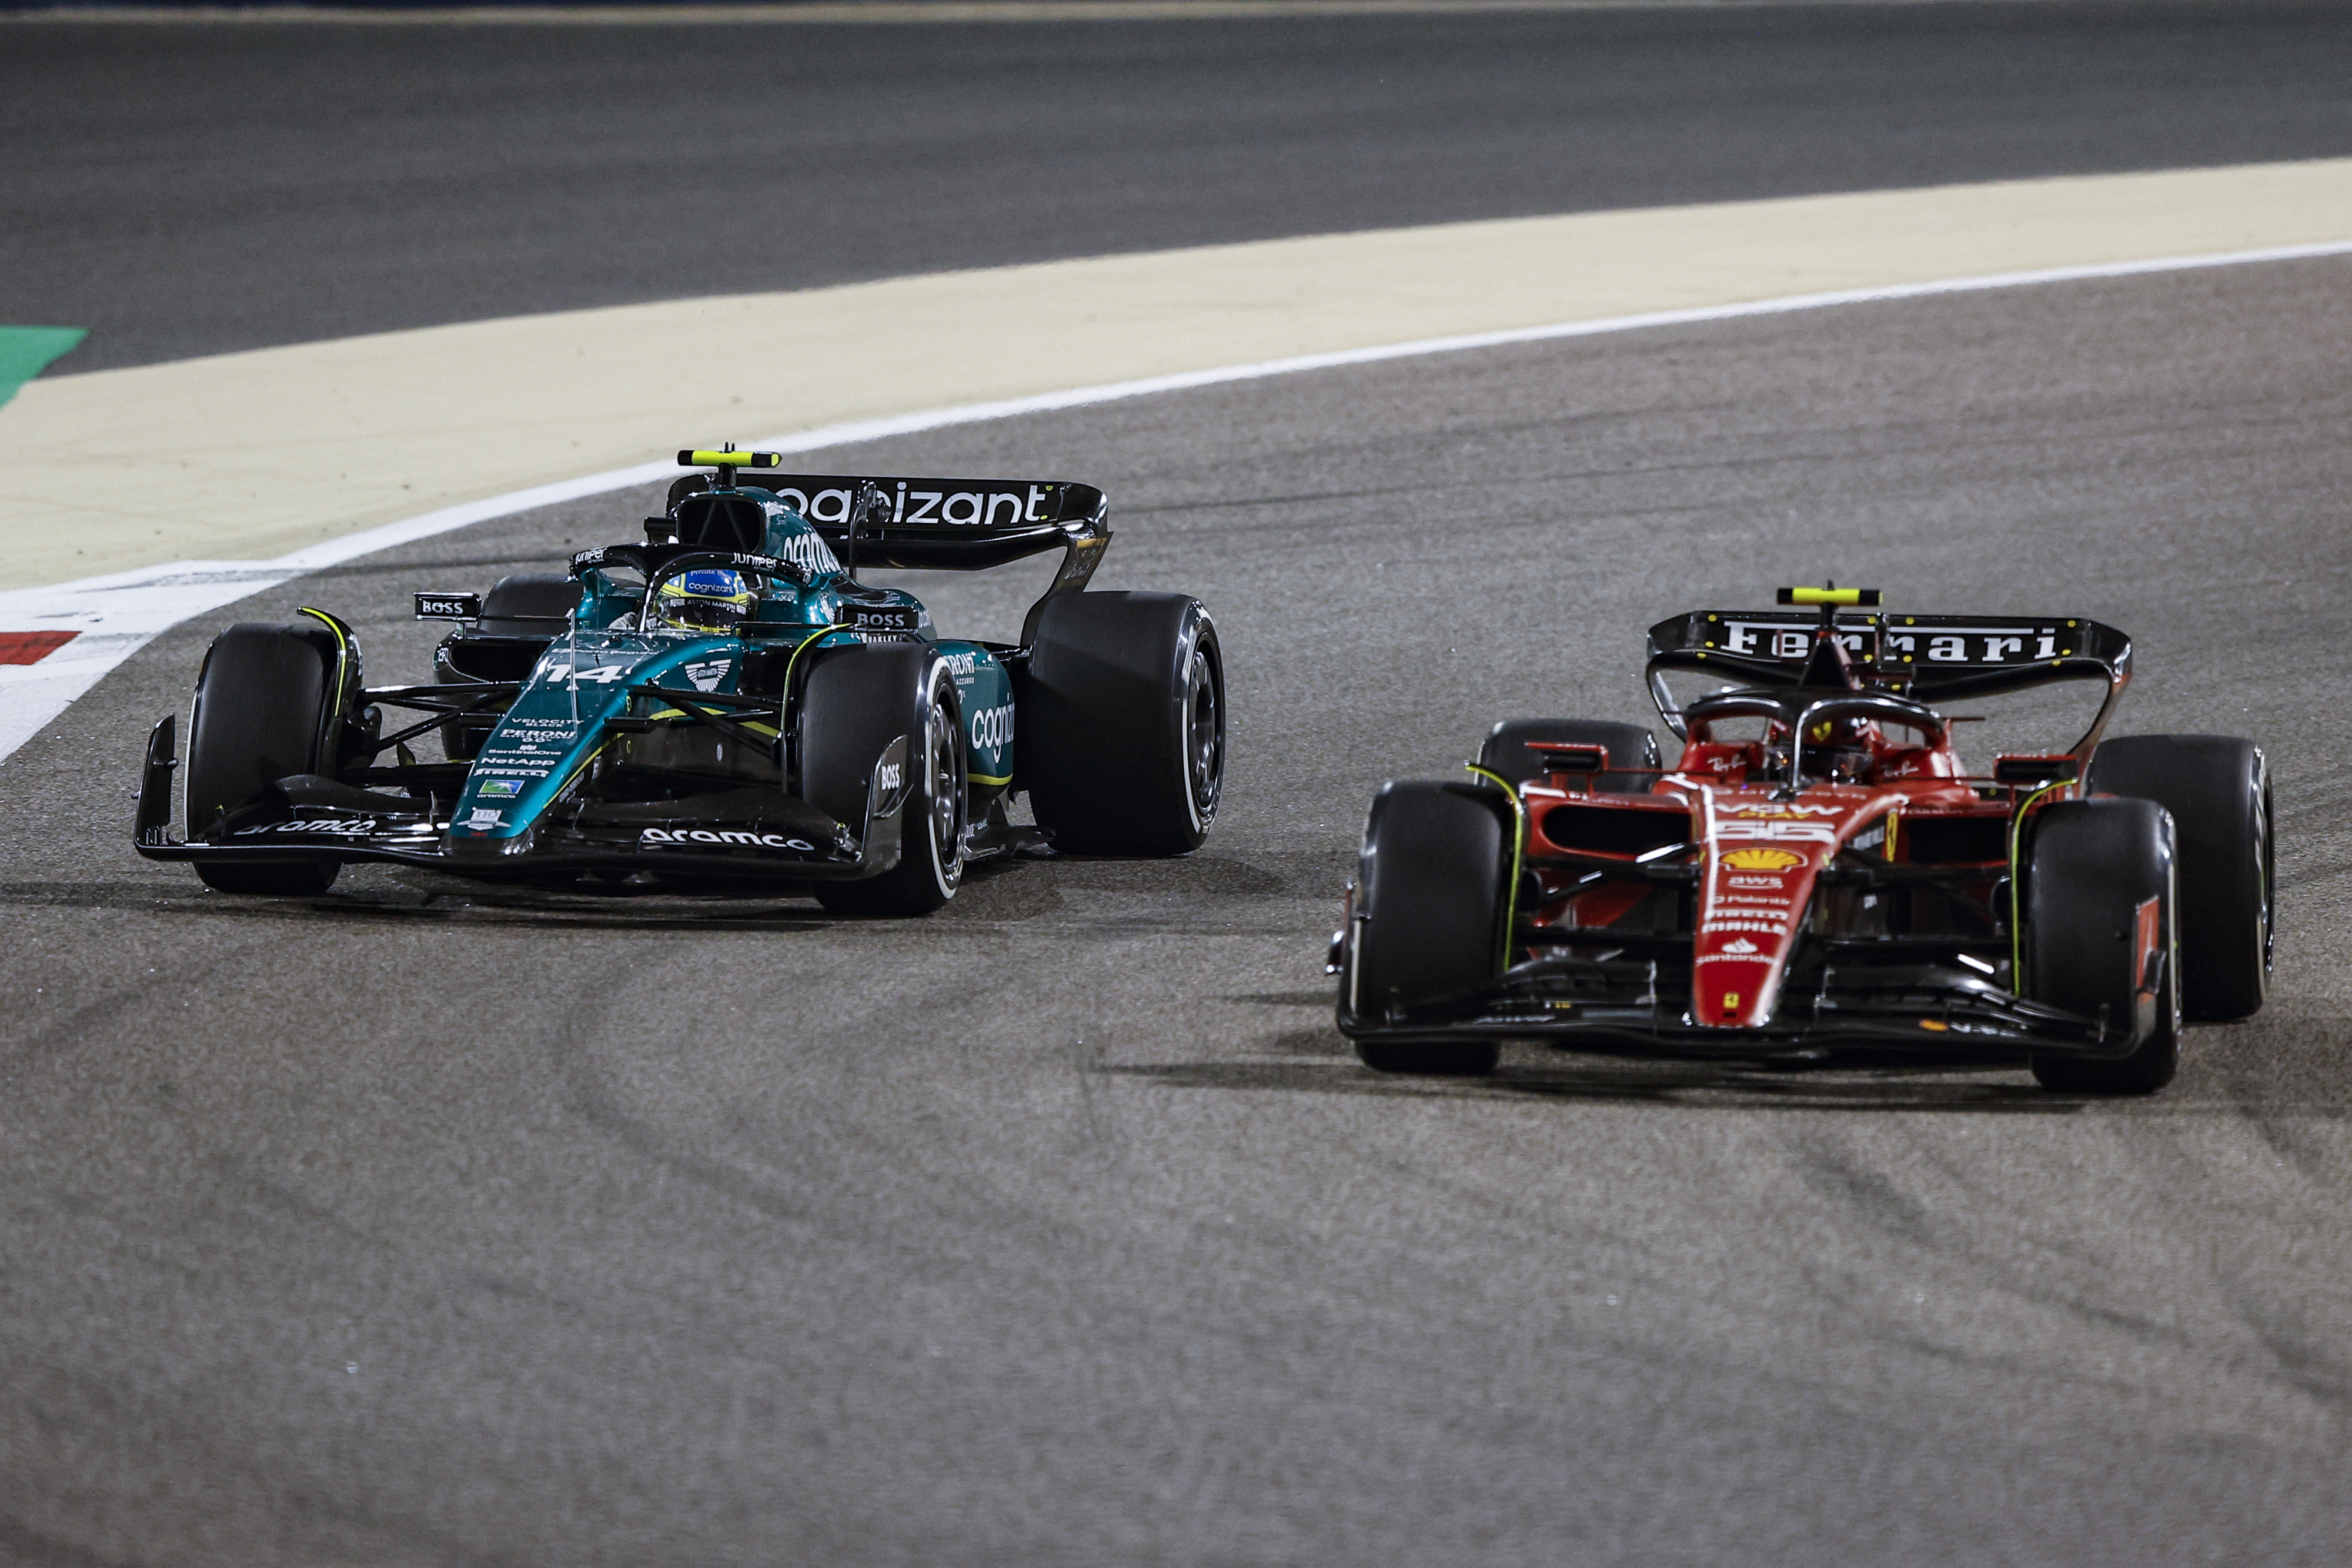 Fernando Alonso and Carlos Sainz fight for third place in Bahrain.